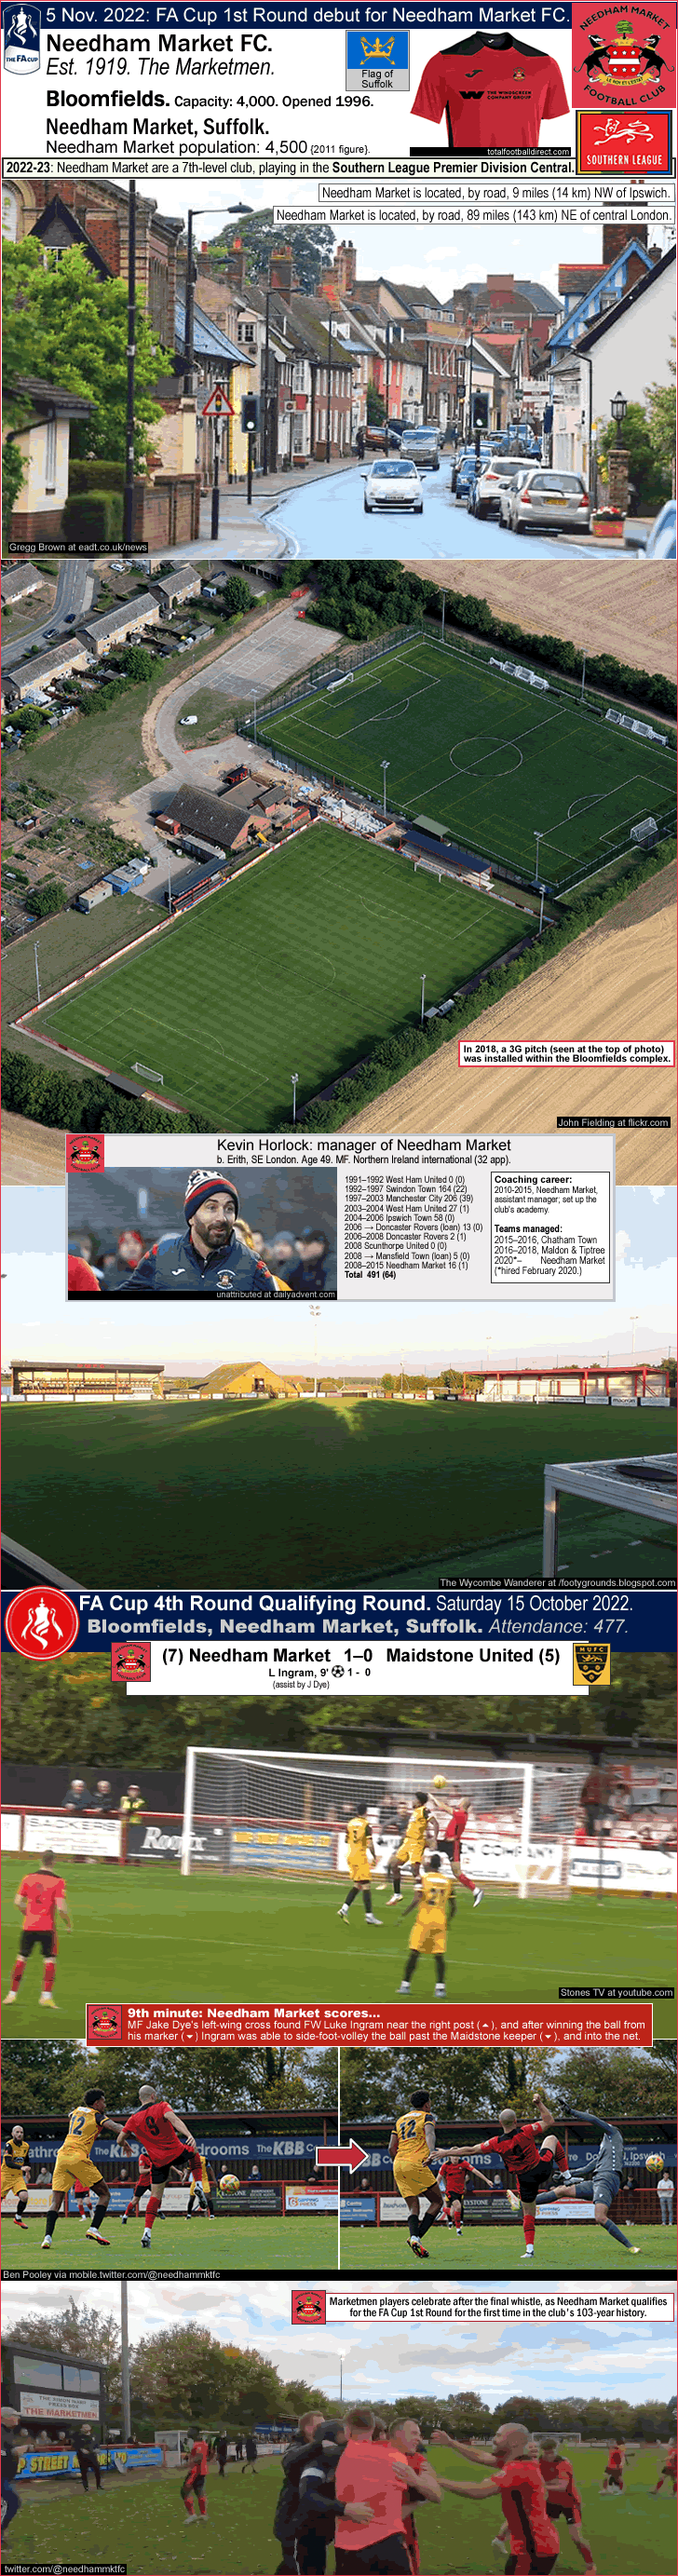 needham-market-fc_2022_qualified-for-fa-cup-1st-round_first-time-ever_bloomfields_i_.gif